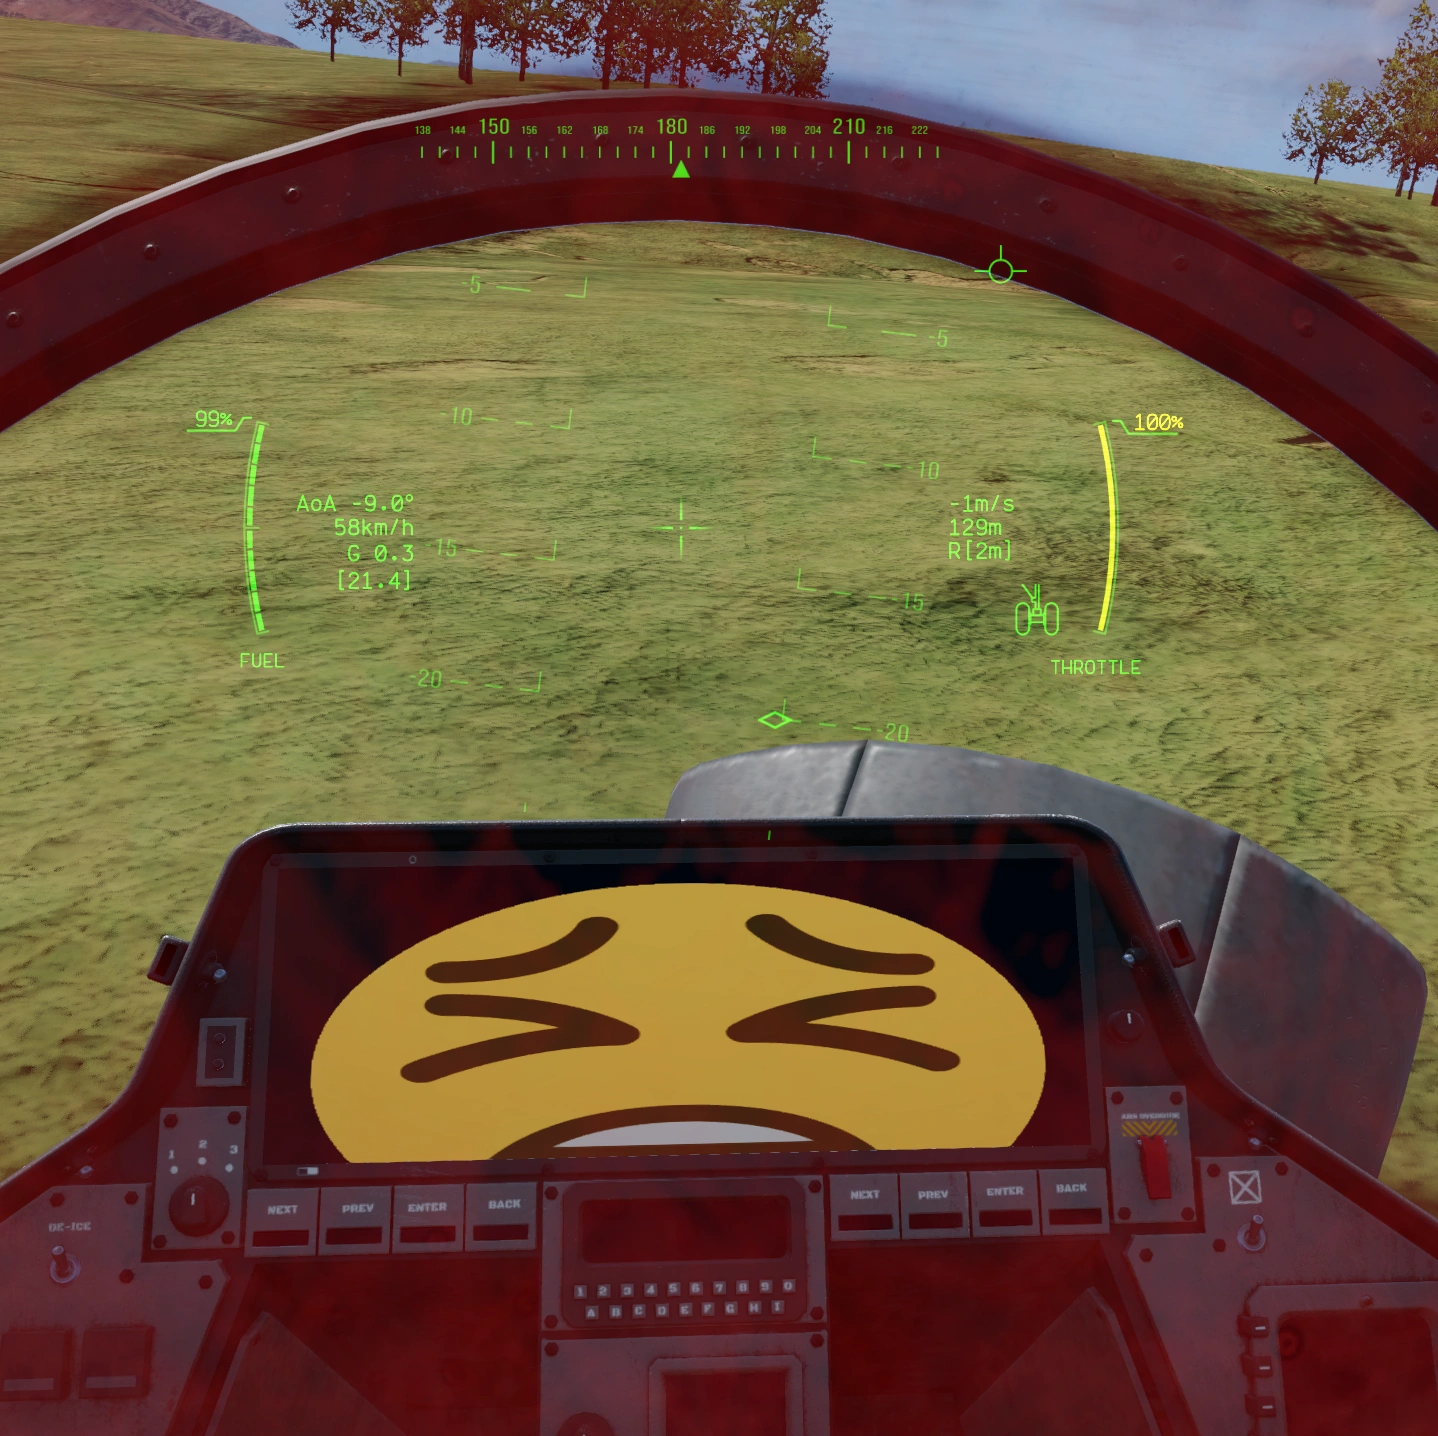 TA-30 Compass retextured to show a tired emoji instead of a bsod on a screen inside its canopy